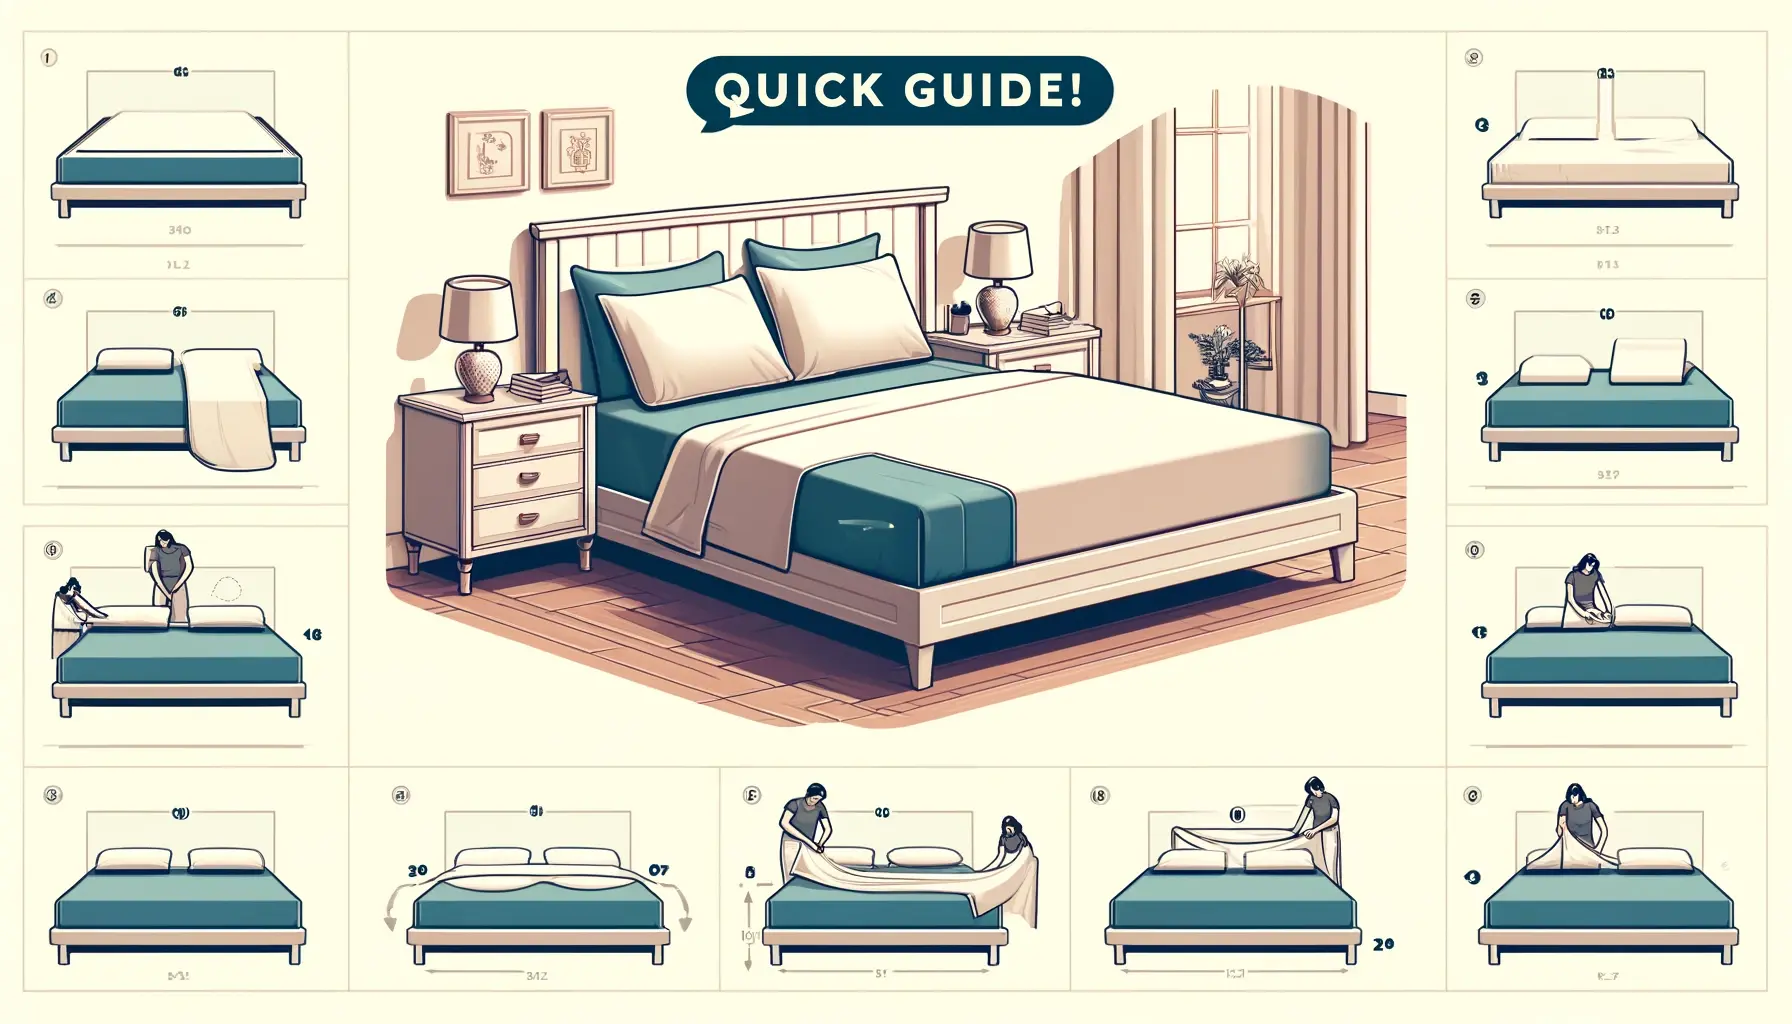 How to Use Queen Sized Sheets (Quick Guide!)